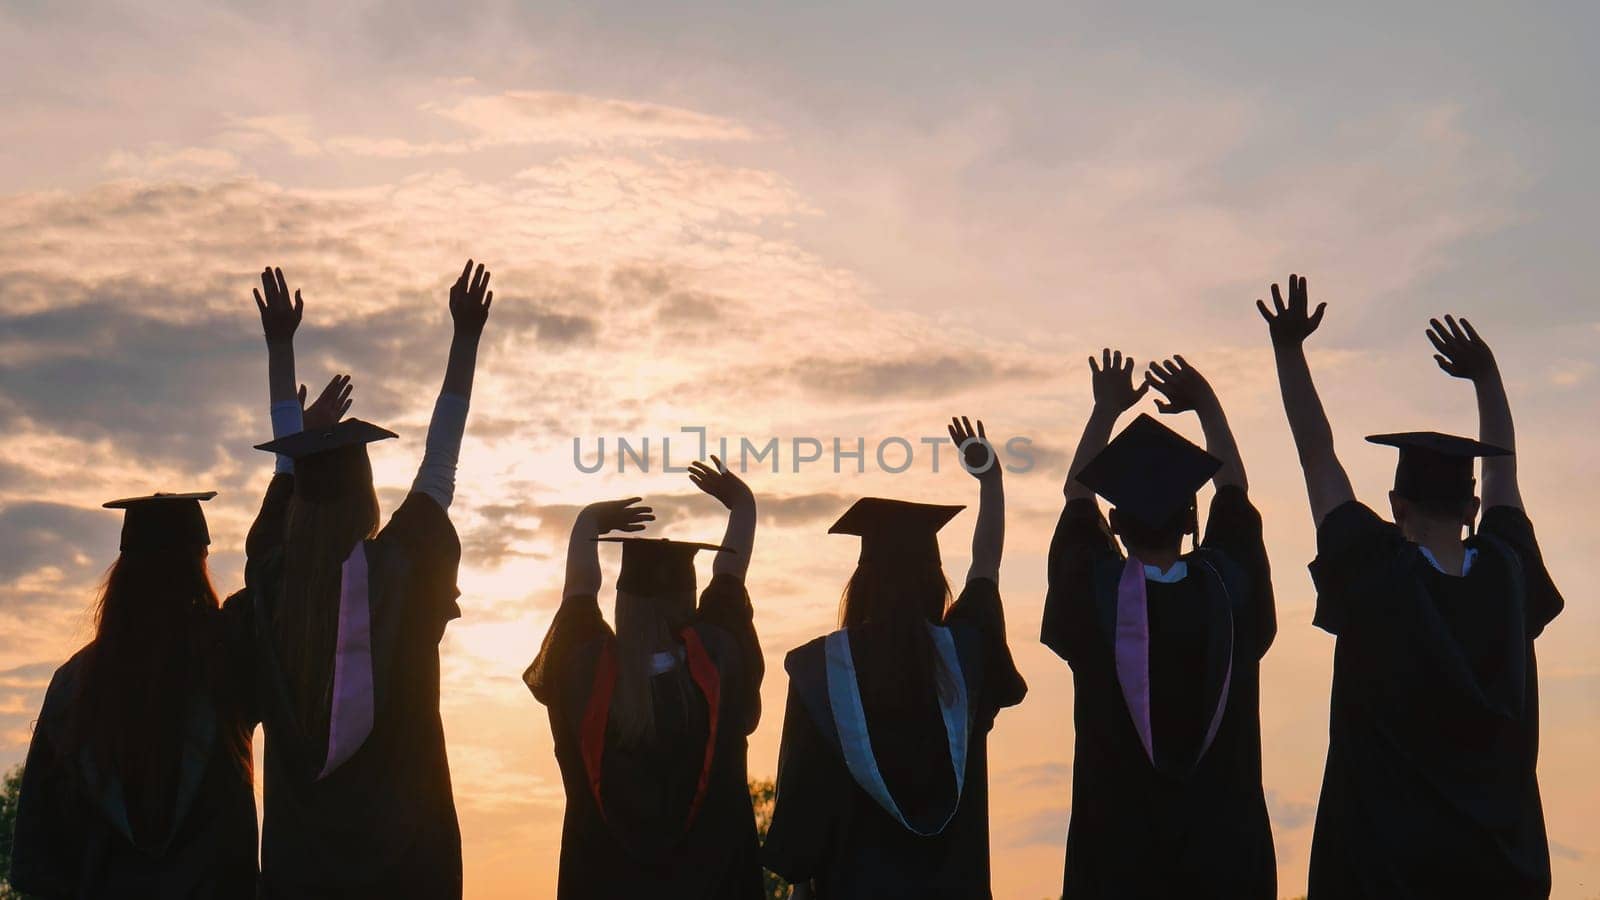 Silhouettes of graduates in black robes waving their arms against the evening sunset. by DovidPro